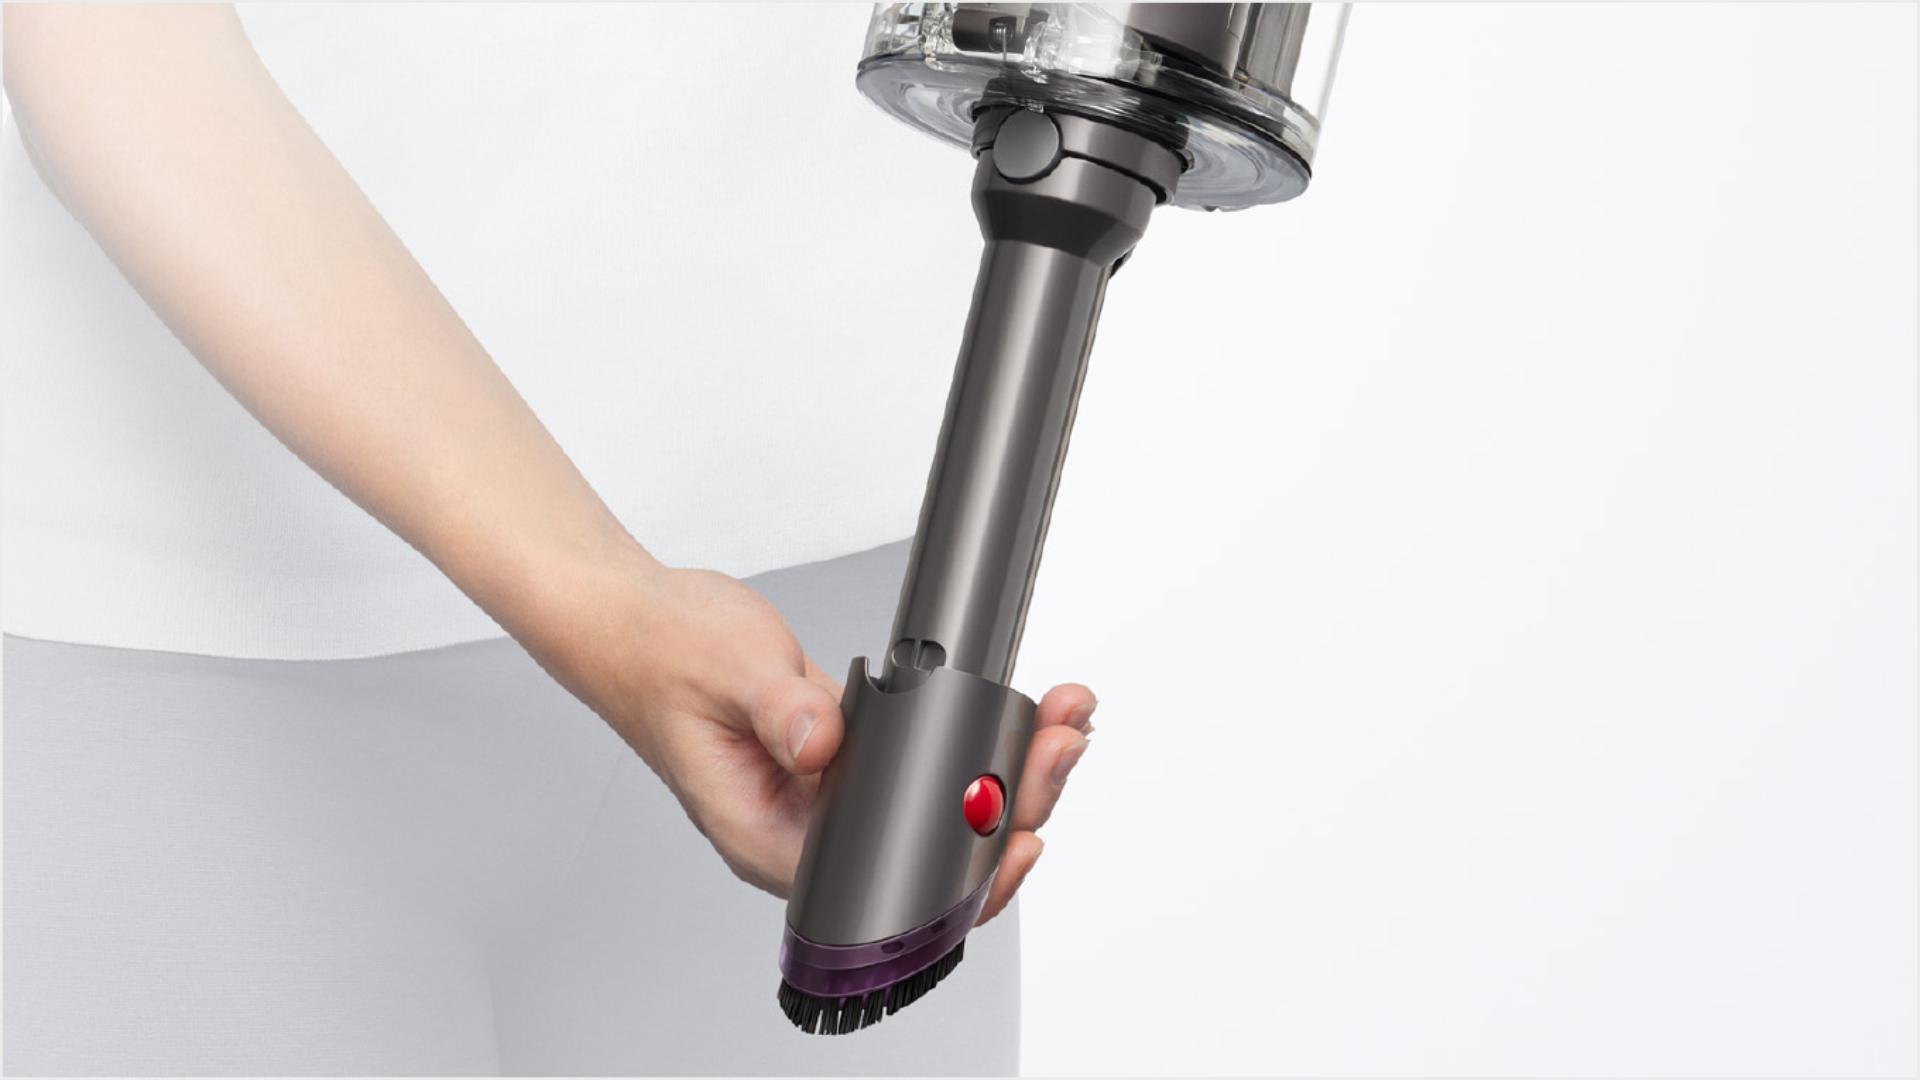 User detaching the wand to use the Built-in dusting and crevice tool.